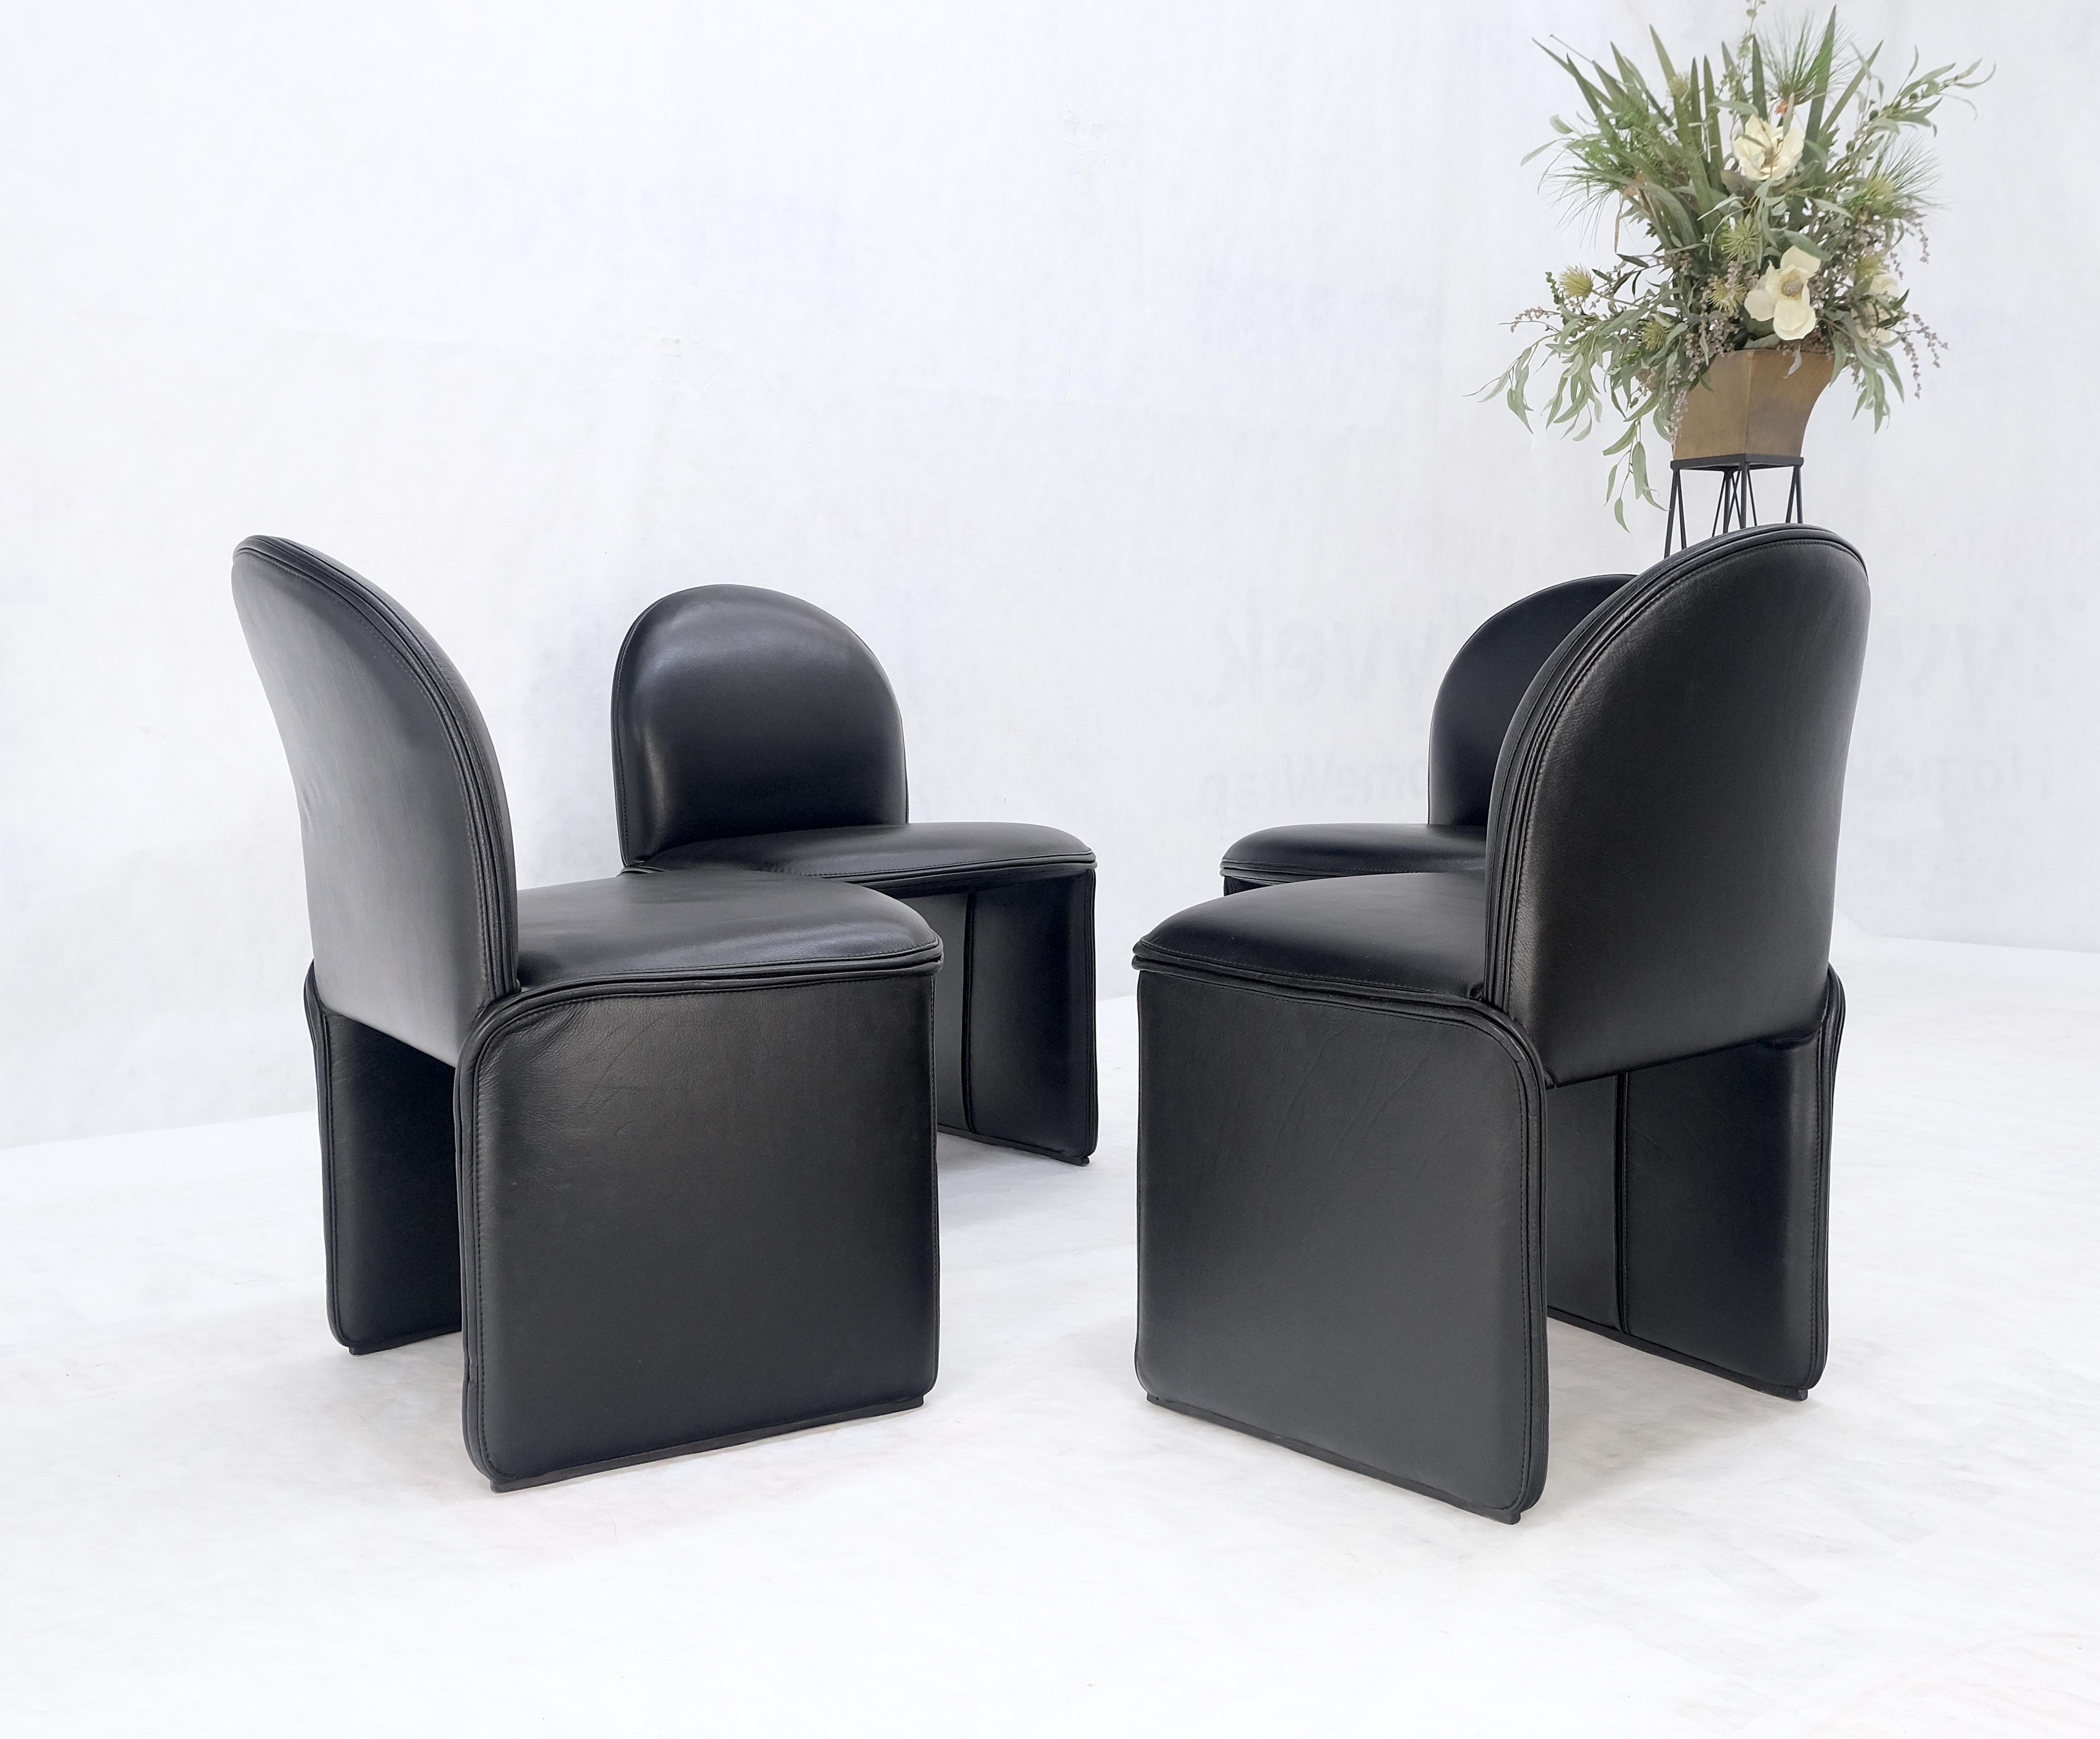 Set 4 Italian Mid Century Modern Black Leather Dining Chairs Bellini Style MINT! For Sale 6